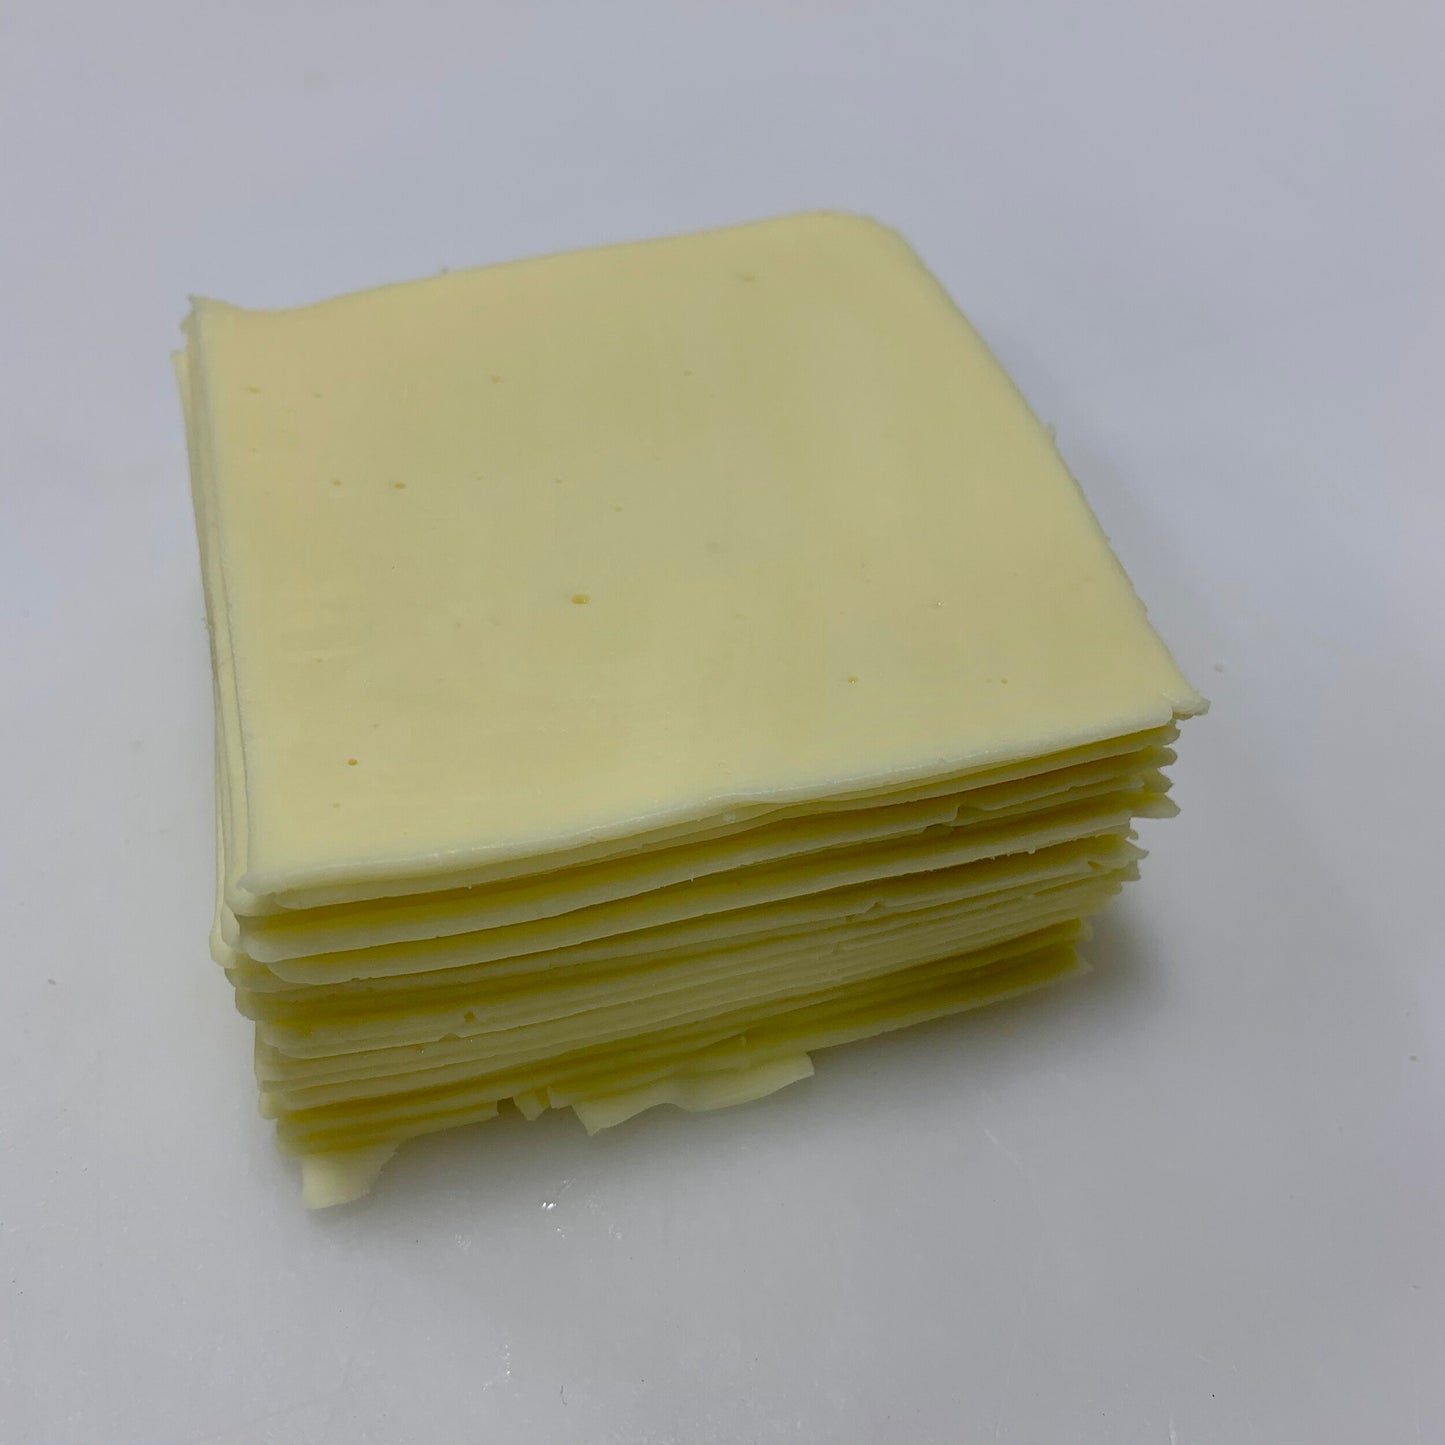 White American Cheese, New Yorker (Sliced)